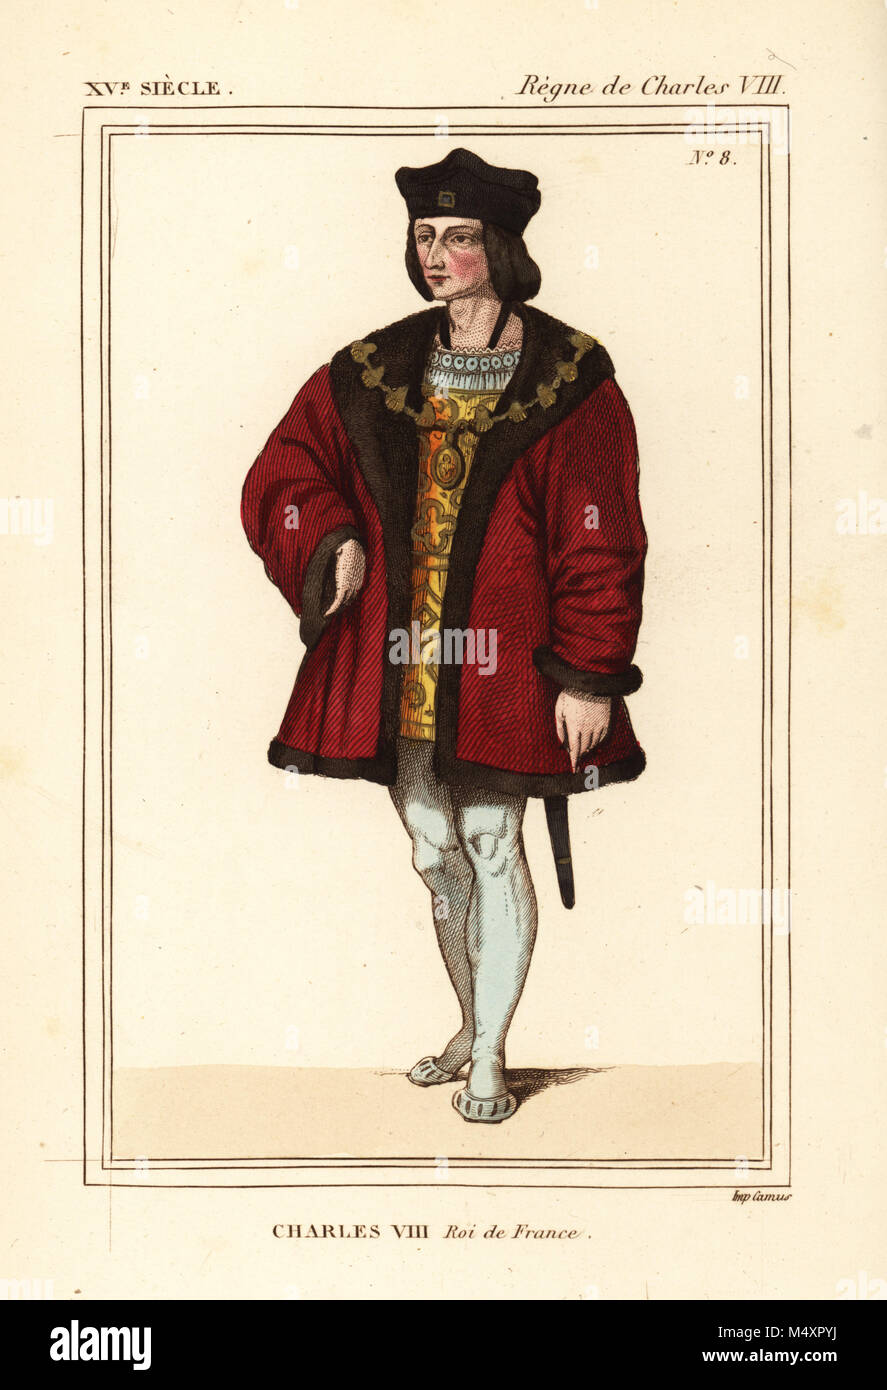 King Charles VIII of France, the Affable, 1470-1498. He wears a black chapel hat and red velvet cassock trimmed with fur and with long sleeves. Handcoloured lithograph after a contemporary portrait in Roger de Gaignieres' portfolio VII 54 from Le Bibliophile Jacob aka Paul Lacroix's Costumes Historiques de la France (Historical Costumes of France), Administration de Librairie, Paris, 1852. Stock Photo